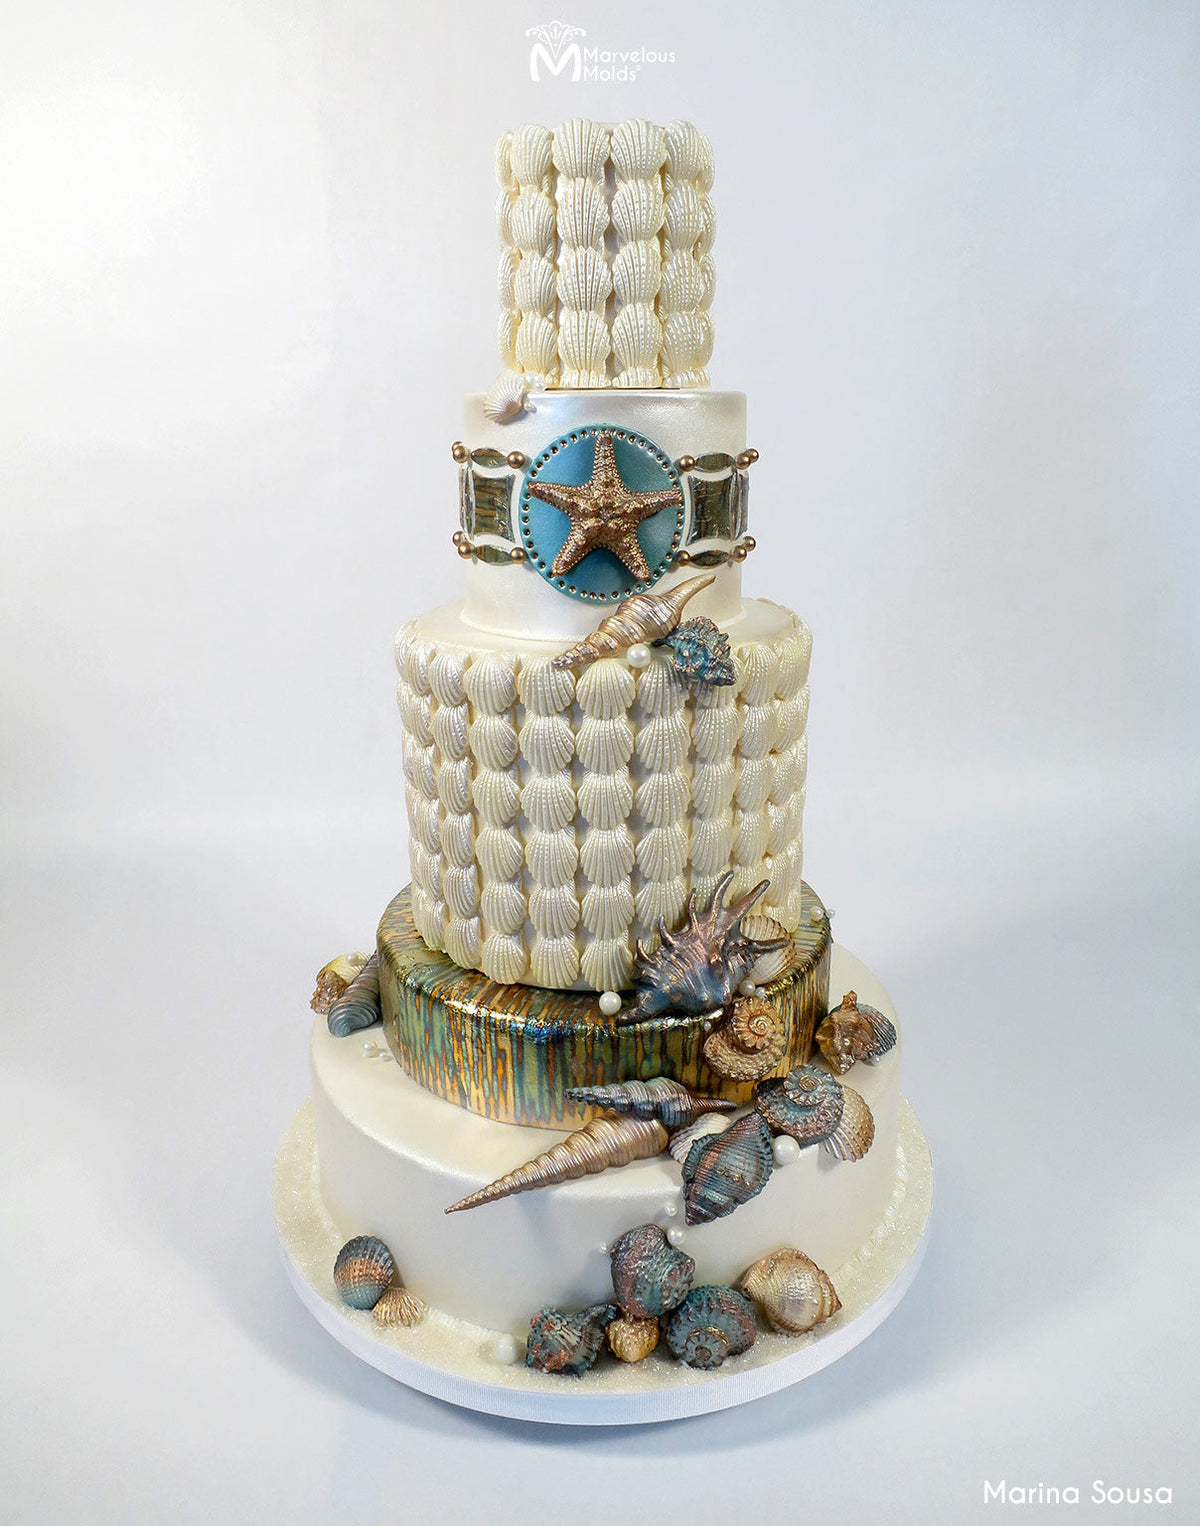 Seashell Themed Wedding Cake Decorated with the Marvelous Molds Lace Murex Shell Mold